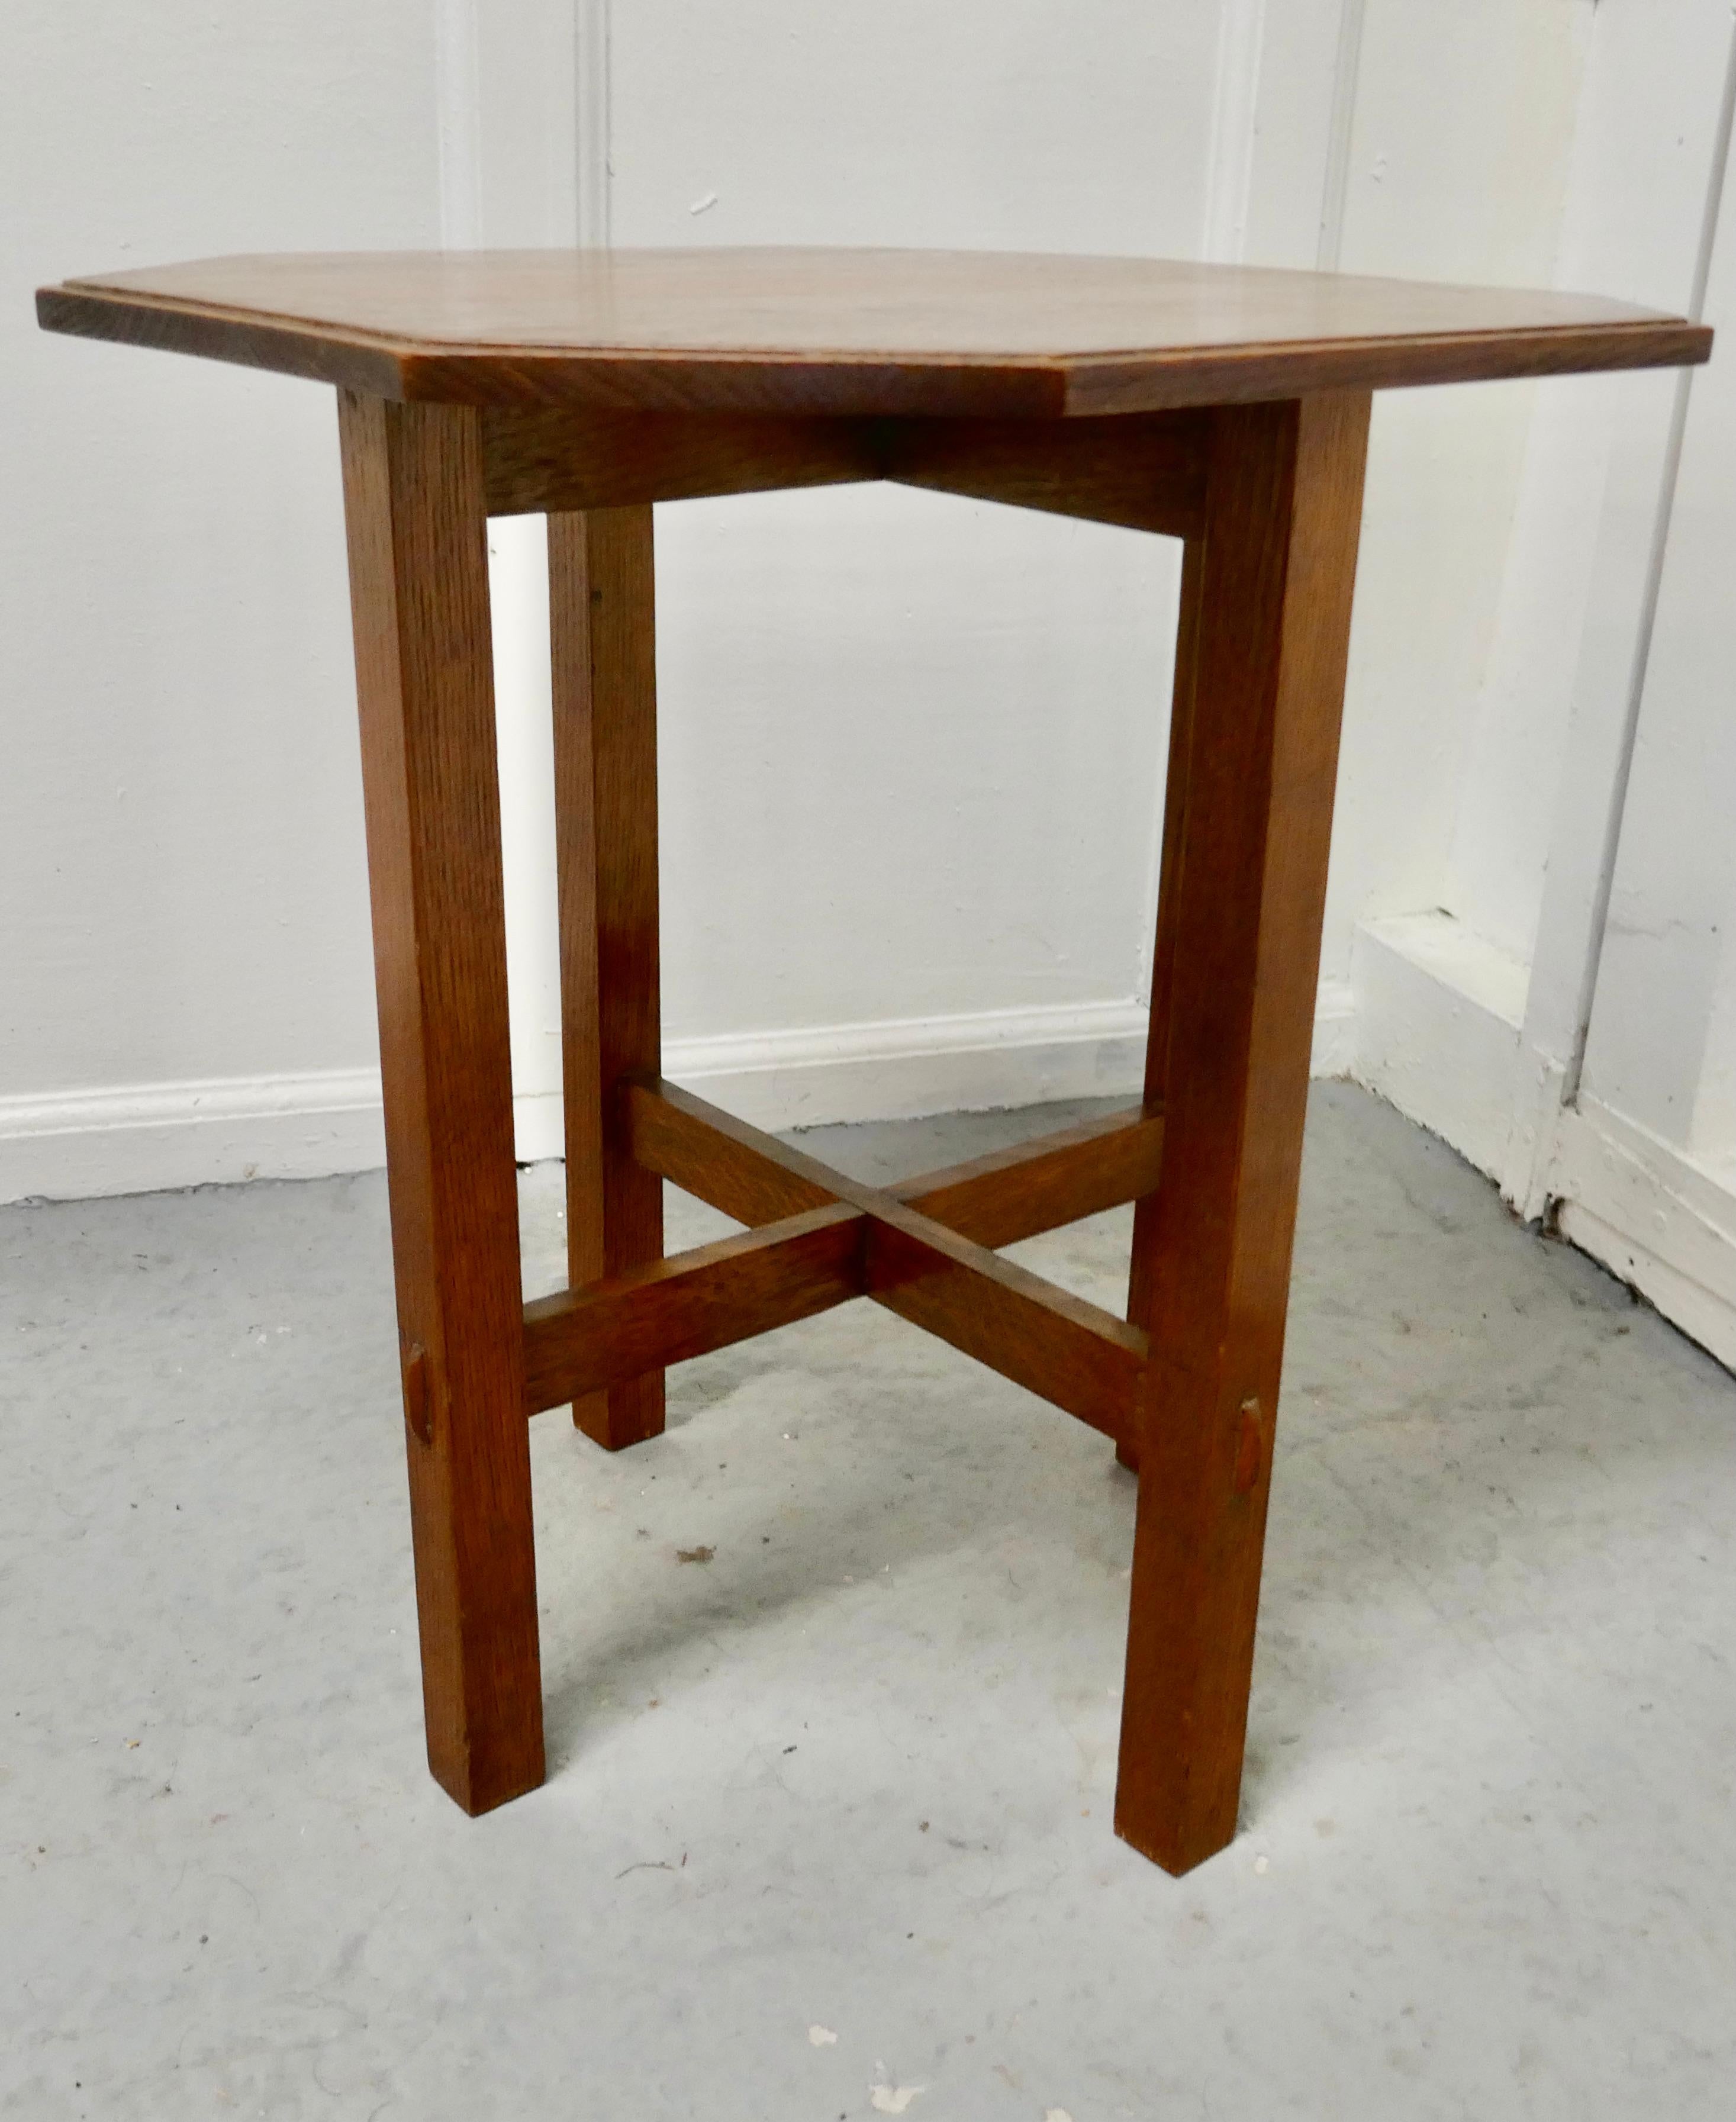 Arts & Crafts golden oak octagonal occasional table

This is a pretty and useful piece, the table is almost square with chamfered corners, it stands on square legs with pegged stretchers
The table is in good condition it is 21” high, and 19” wide